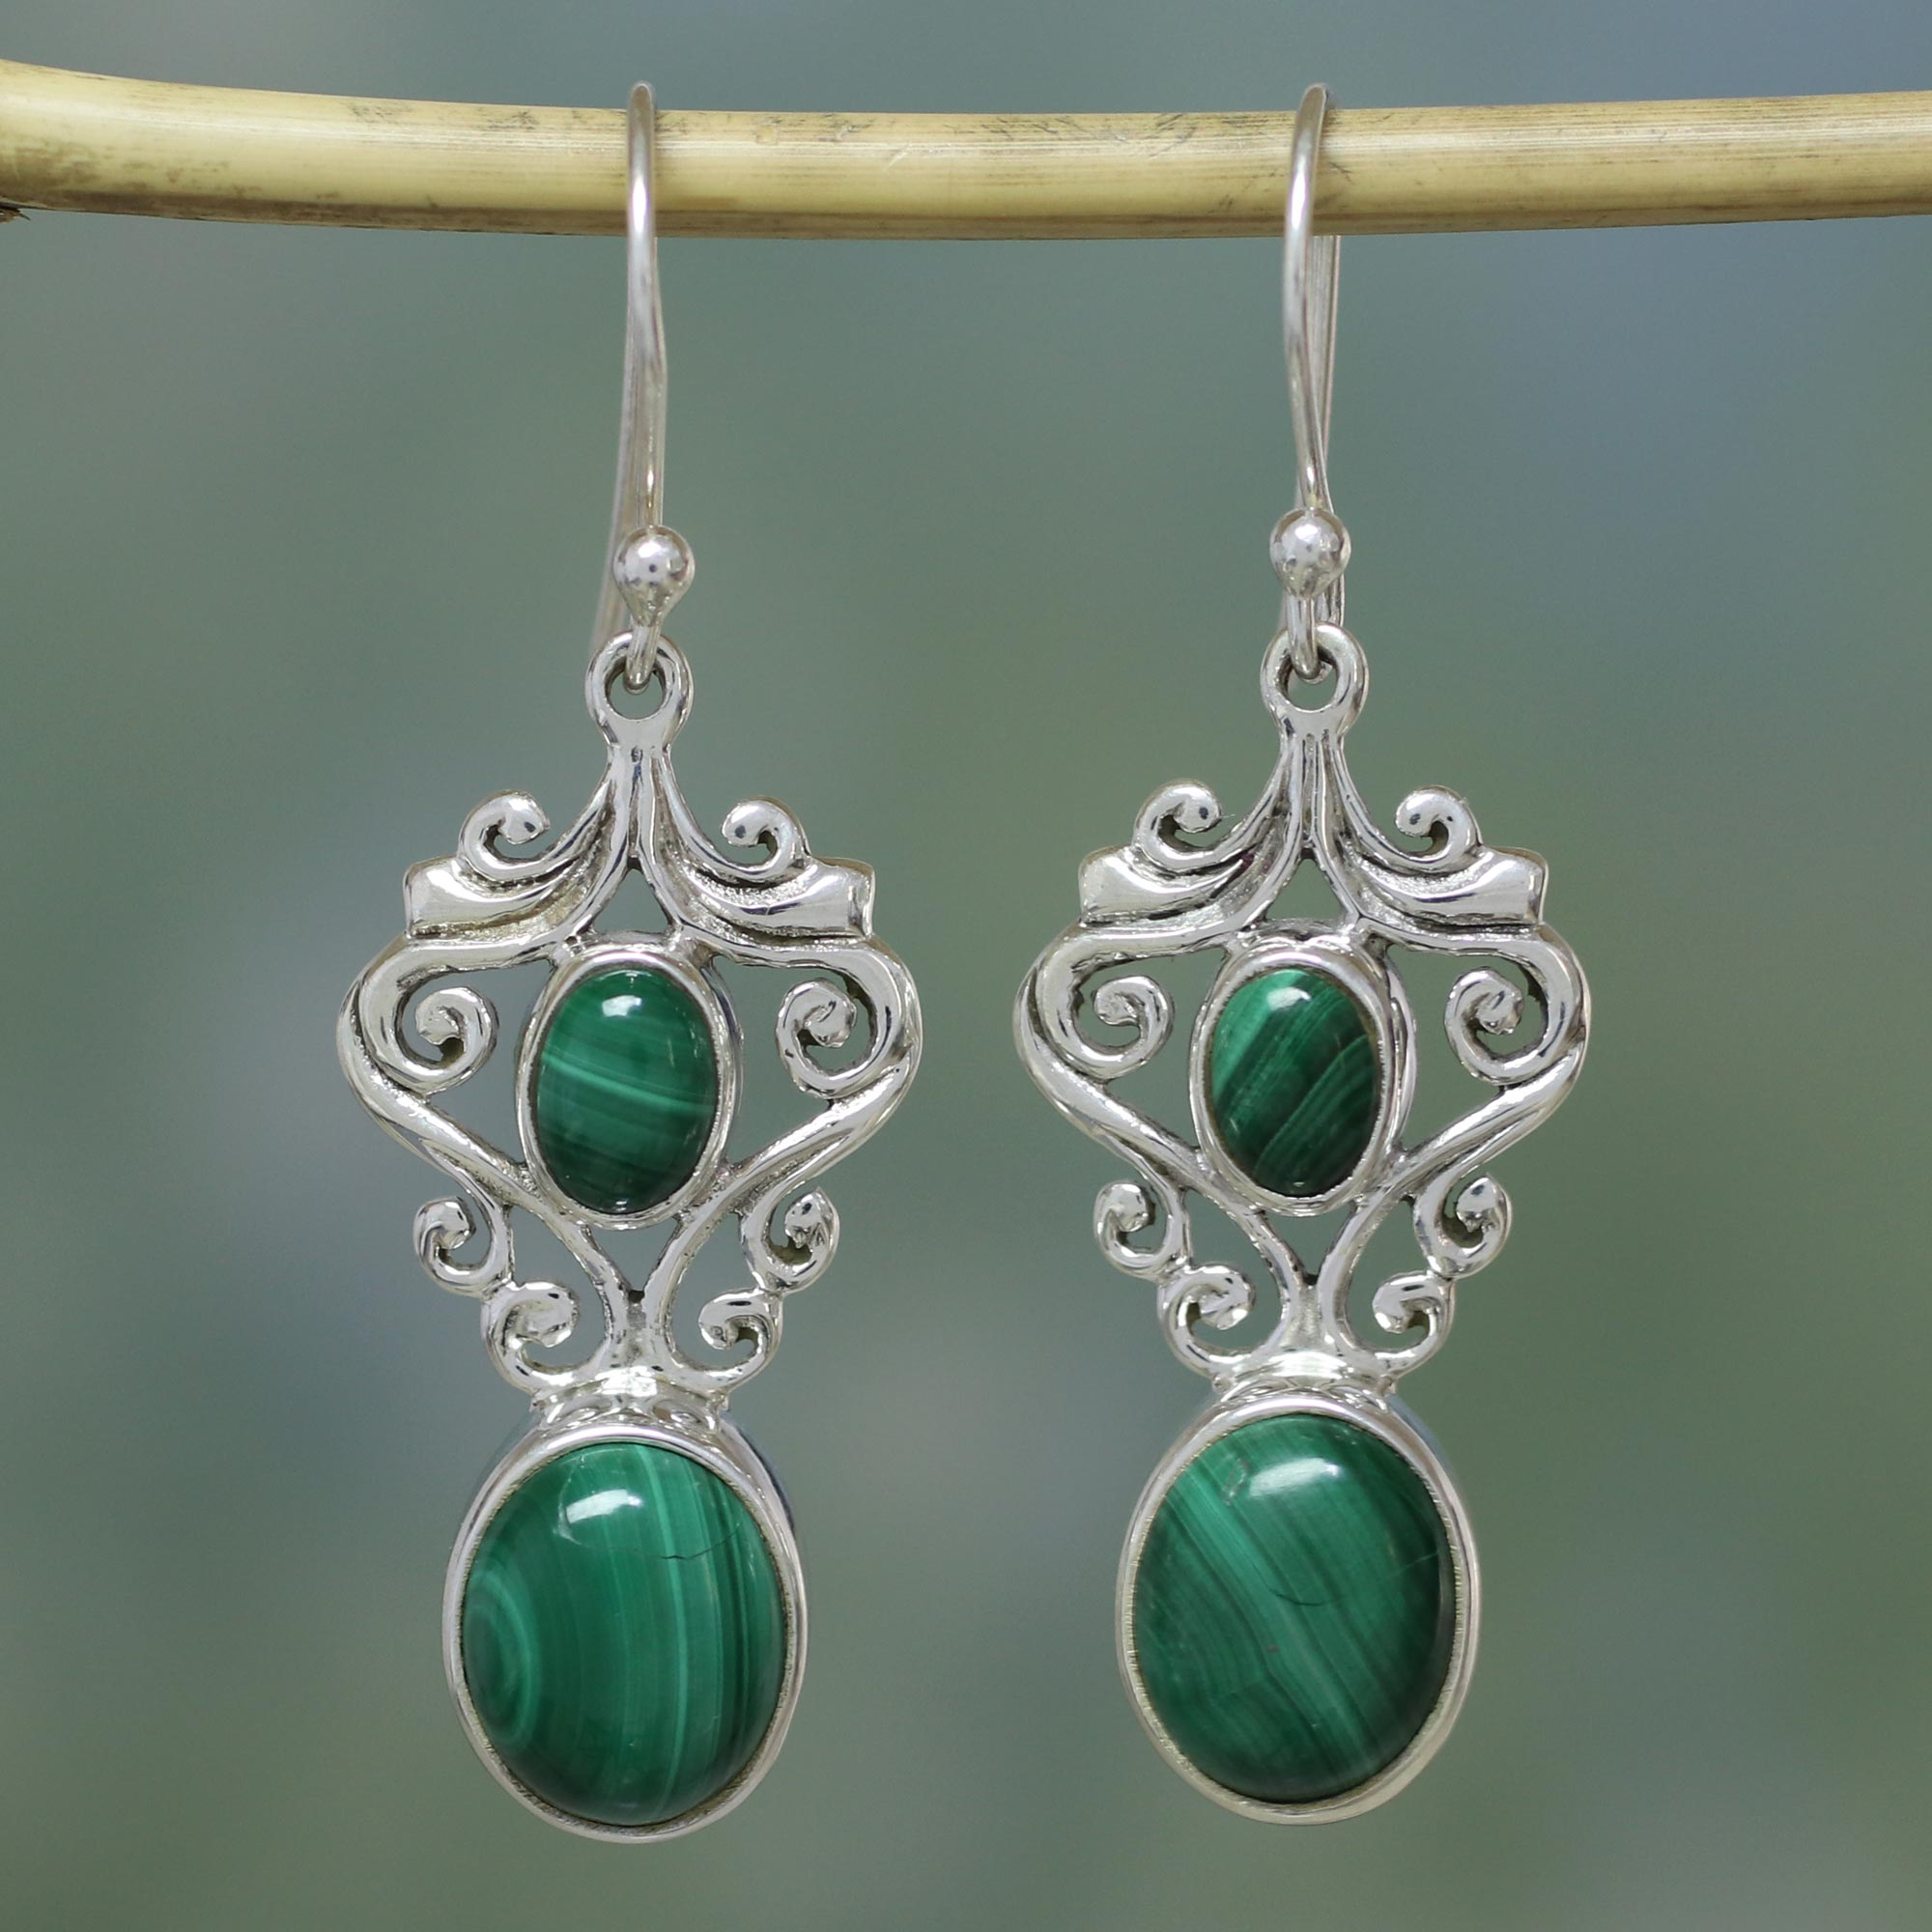 Fair Trade Jewelry Sterling Silver Malachite Earrings - Natural Majesty ...